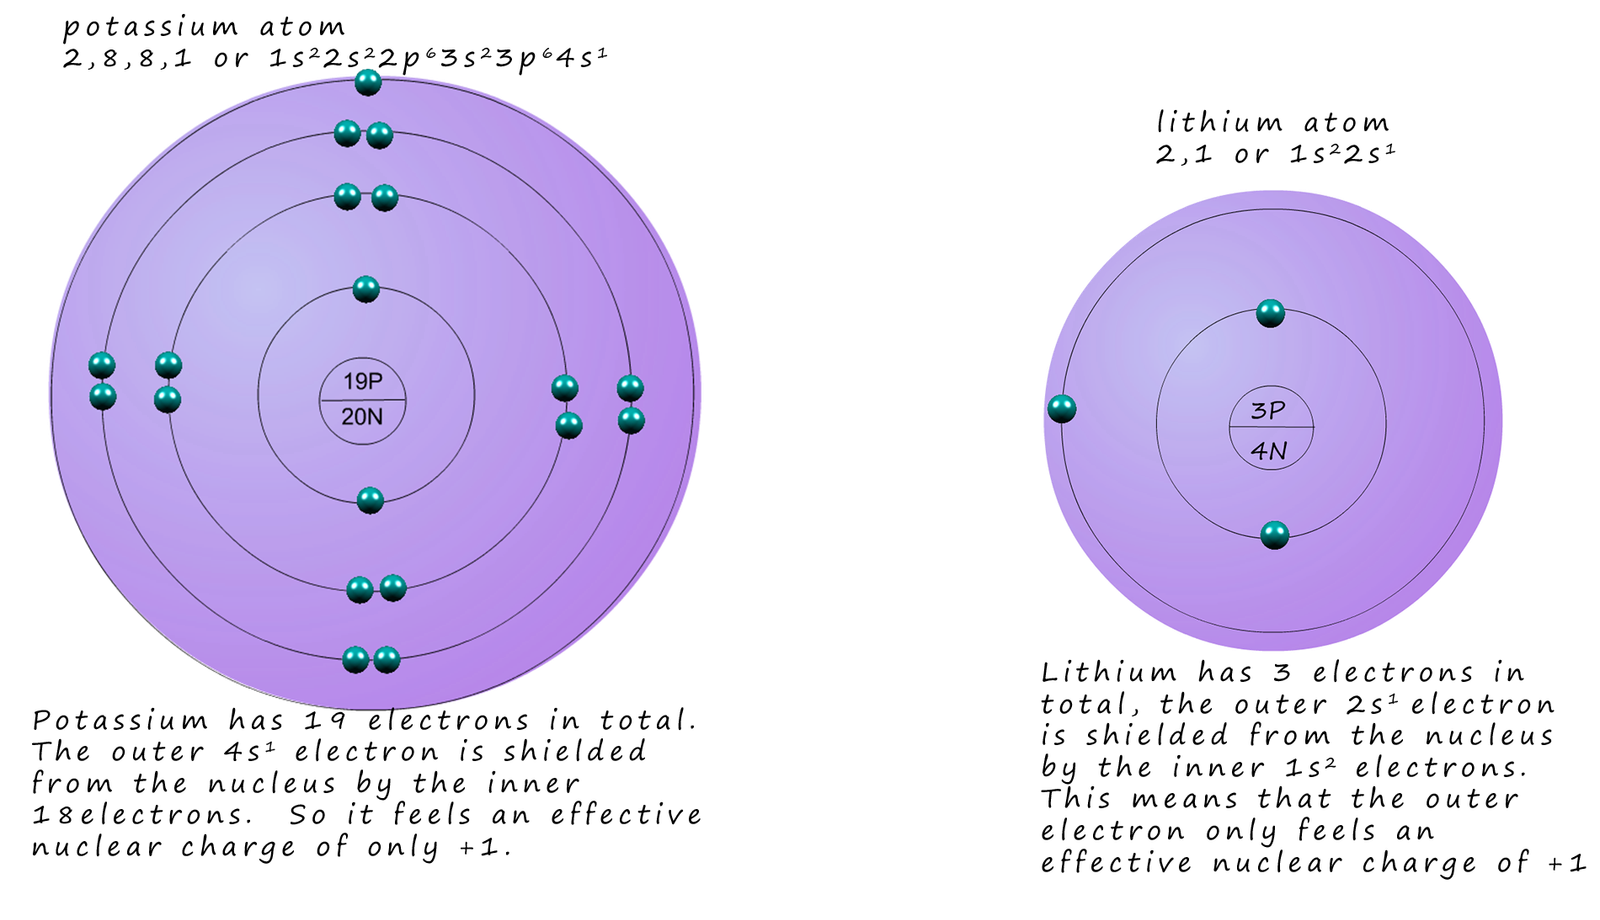 Atomic structure diagrams to show the effective nuclear charge in a potassium and lithium atom.